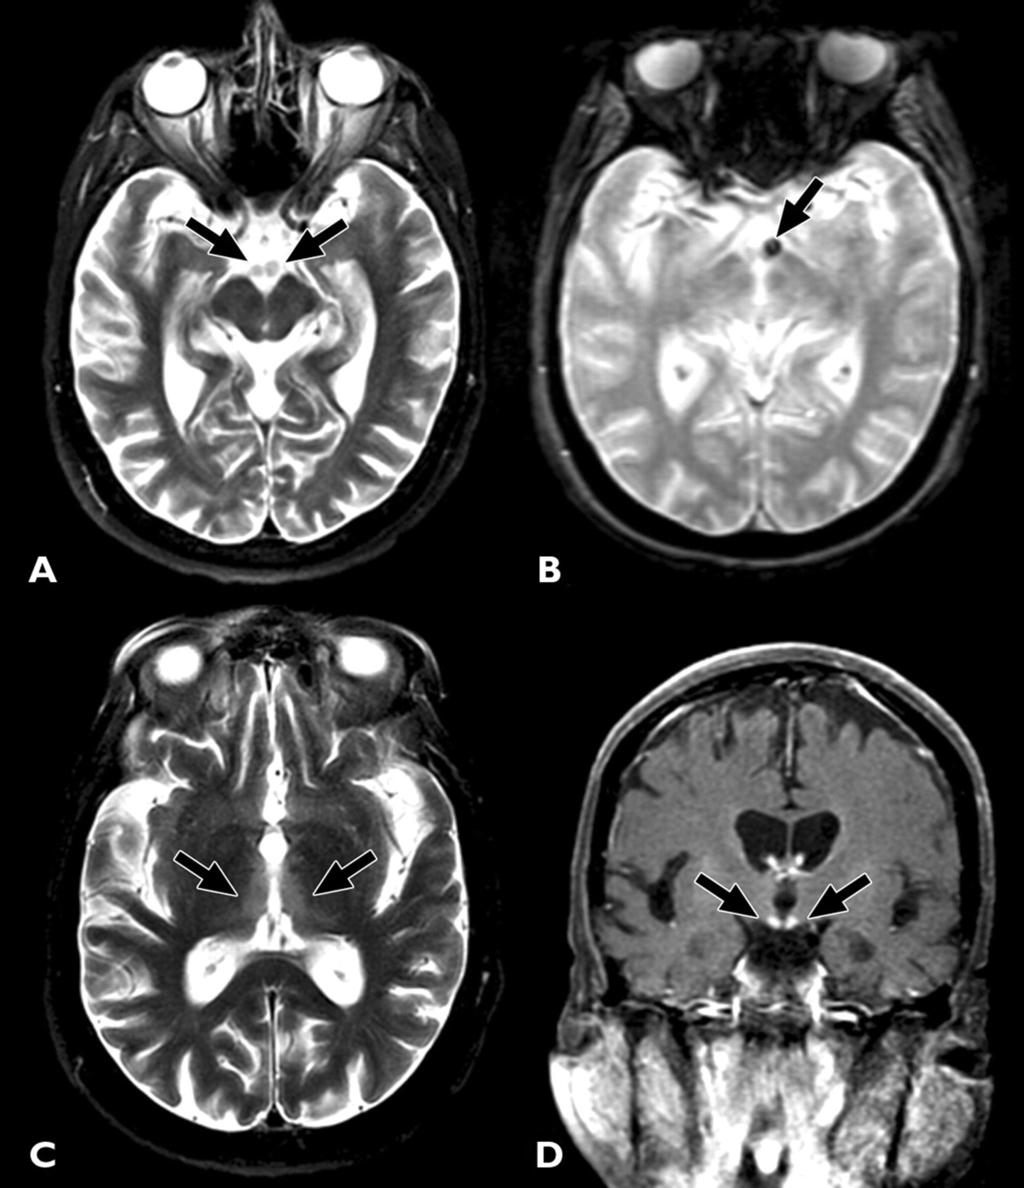 Wernicke's --61-year-old alcoholic man with Wernicke encephalopathy during acute phase of disease